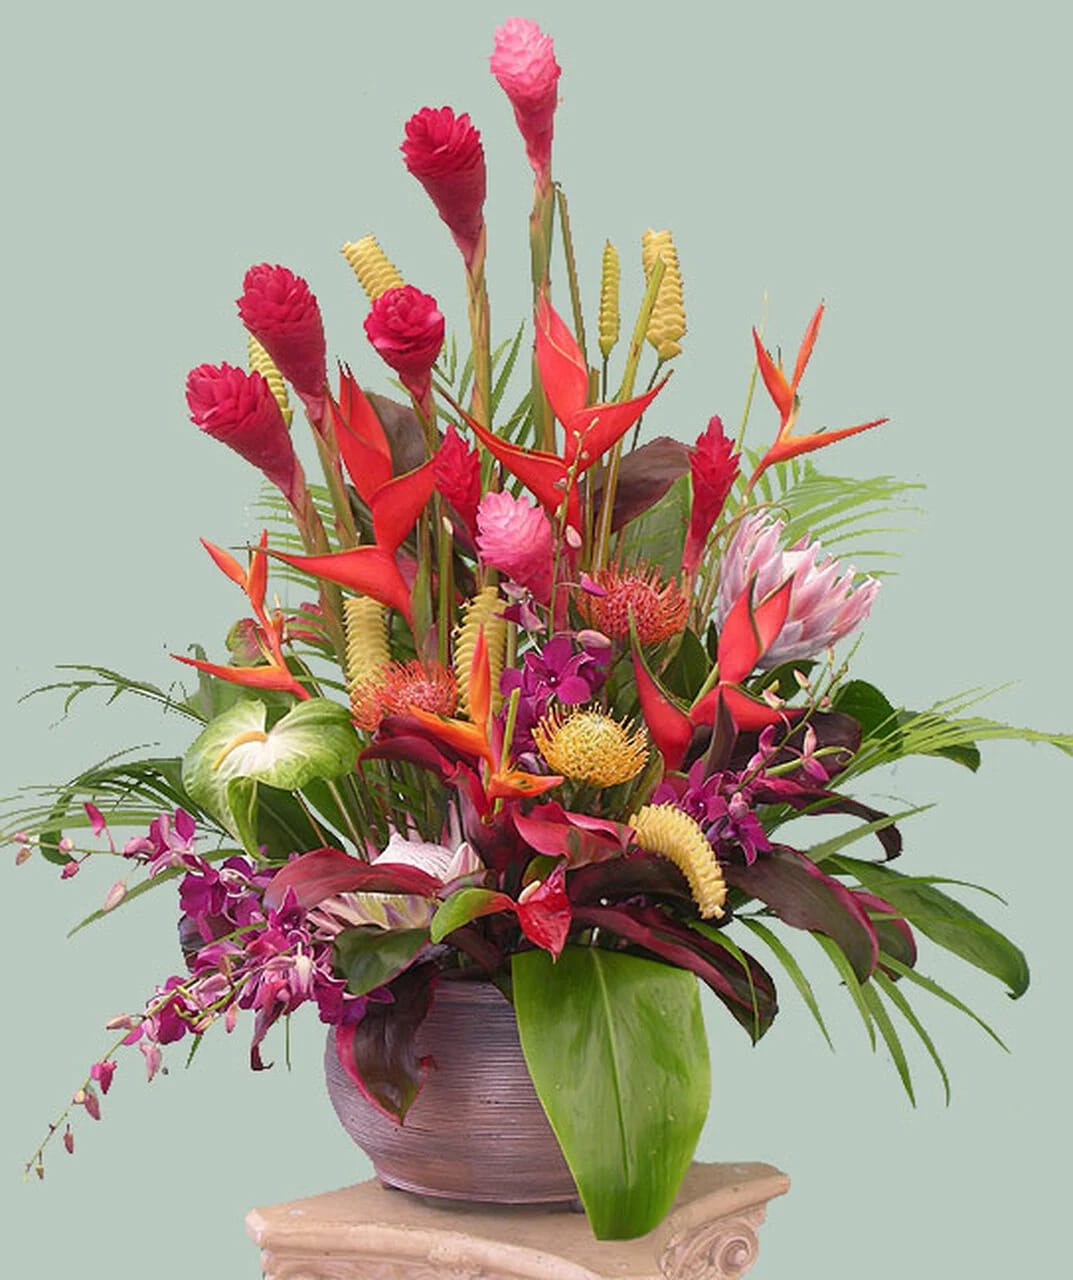 Grand Lux - Experience the allure of the tropics with our magnificent tropical floral arrangement. This stunning display is expertly crafted with a combination of vibrant tropical flowers, including red Ginger, Heliconia, Protea, purple dendrobium Orchids, and anthuriums, all beautifully arranged in a handcrafted ceramic container.  The red Ginger steals the show with its striking and fiery appearance. This tropical bloom symbolizes strength, passion, and love. Its bold and vibrant color adds a touch of drama and excitement to the arrangement, instantly captivating the attention of all who behold it.  The Heliconia, with its unique and exotic shape, adds a touch of whimsy and charm. These tropical flowers symbolize hospitality, joy, and vibrant energy. Their vibrant hues and slender form create a visual spectacle, reflecting the natural beauty and mystique of the tropics.  The Protea, with its striking presence and remarkable longevity, represents courage, transformation, and diversity. These tropical blooms come in a variety of shapes and colors, adding a sense of individuality and distinctiveness to the arrangement. Their captivating beauty and resilience make them an ideal addition to any tropical floral display.  The purple dendrobium Orchids convey elegance, grace, and luxury. These tropical blooms symbolize refinement and admiration. Their intricate petals and delicate charm create a sense of enchantment and add a touch of sophistication to the overall design.  Anthuriums, with their heart-shaped blooms and glossy green leaves, add a romantic and tropical touch. These flowers symbolize hospitality, happiness, and abundance. Their vibrant colors and unique shape create a memorable focal point, radiating warmth and welcome.  Crafted in a handcrafted ceramic container, this tropical floral arrangement exudes artistry and sophistication. The ceramic container adds a touch of contemporary elegance and serves as a perfect complement to the vibrant tropical blooms. It enhances the overall visual impact and elevates the display to new heights.  Our magnificent tropical floral arrangement showcases the beauty and diversity of tropical flowers, inviting you to escape to a paradise of color and enchantment. Whether it's a statement piece for your home or a gift for a special occasion, this arrangement is sure to bring the vibrant essence of the tropics into any space.  Note: Availability of tropical flowers may vary based on the season and location. 